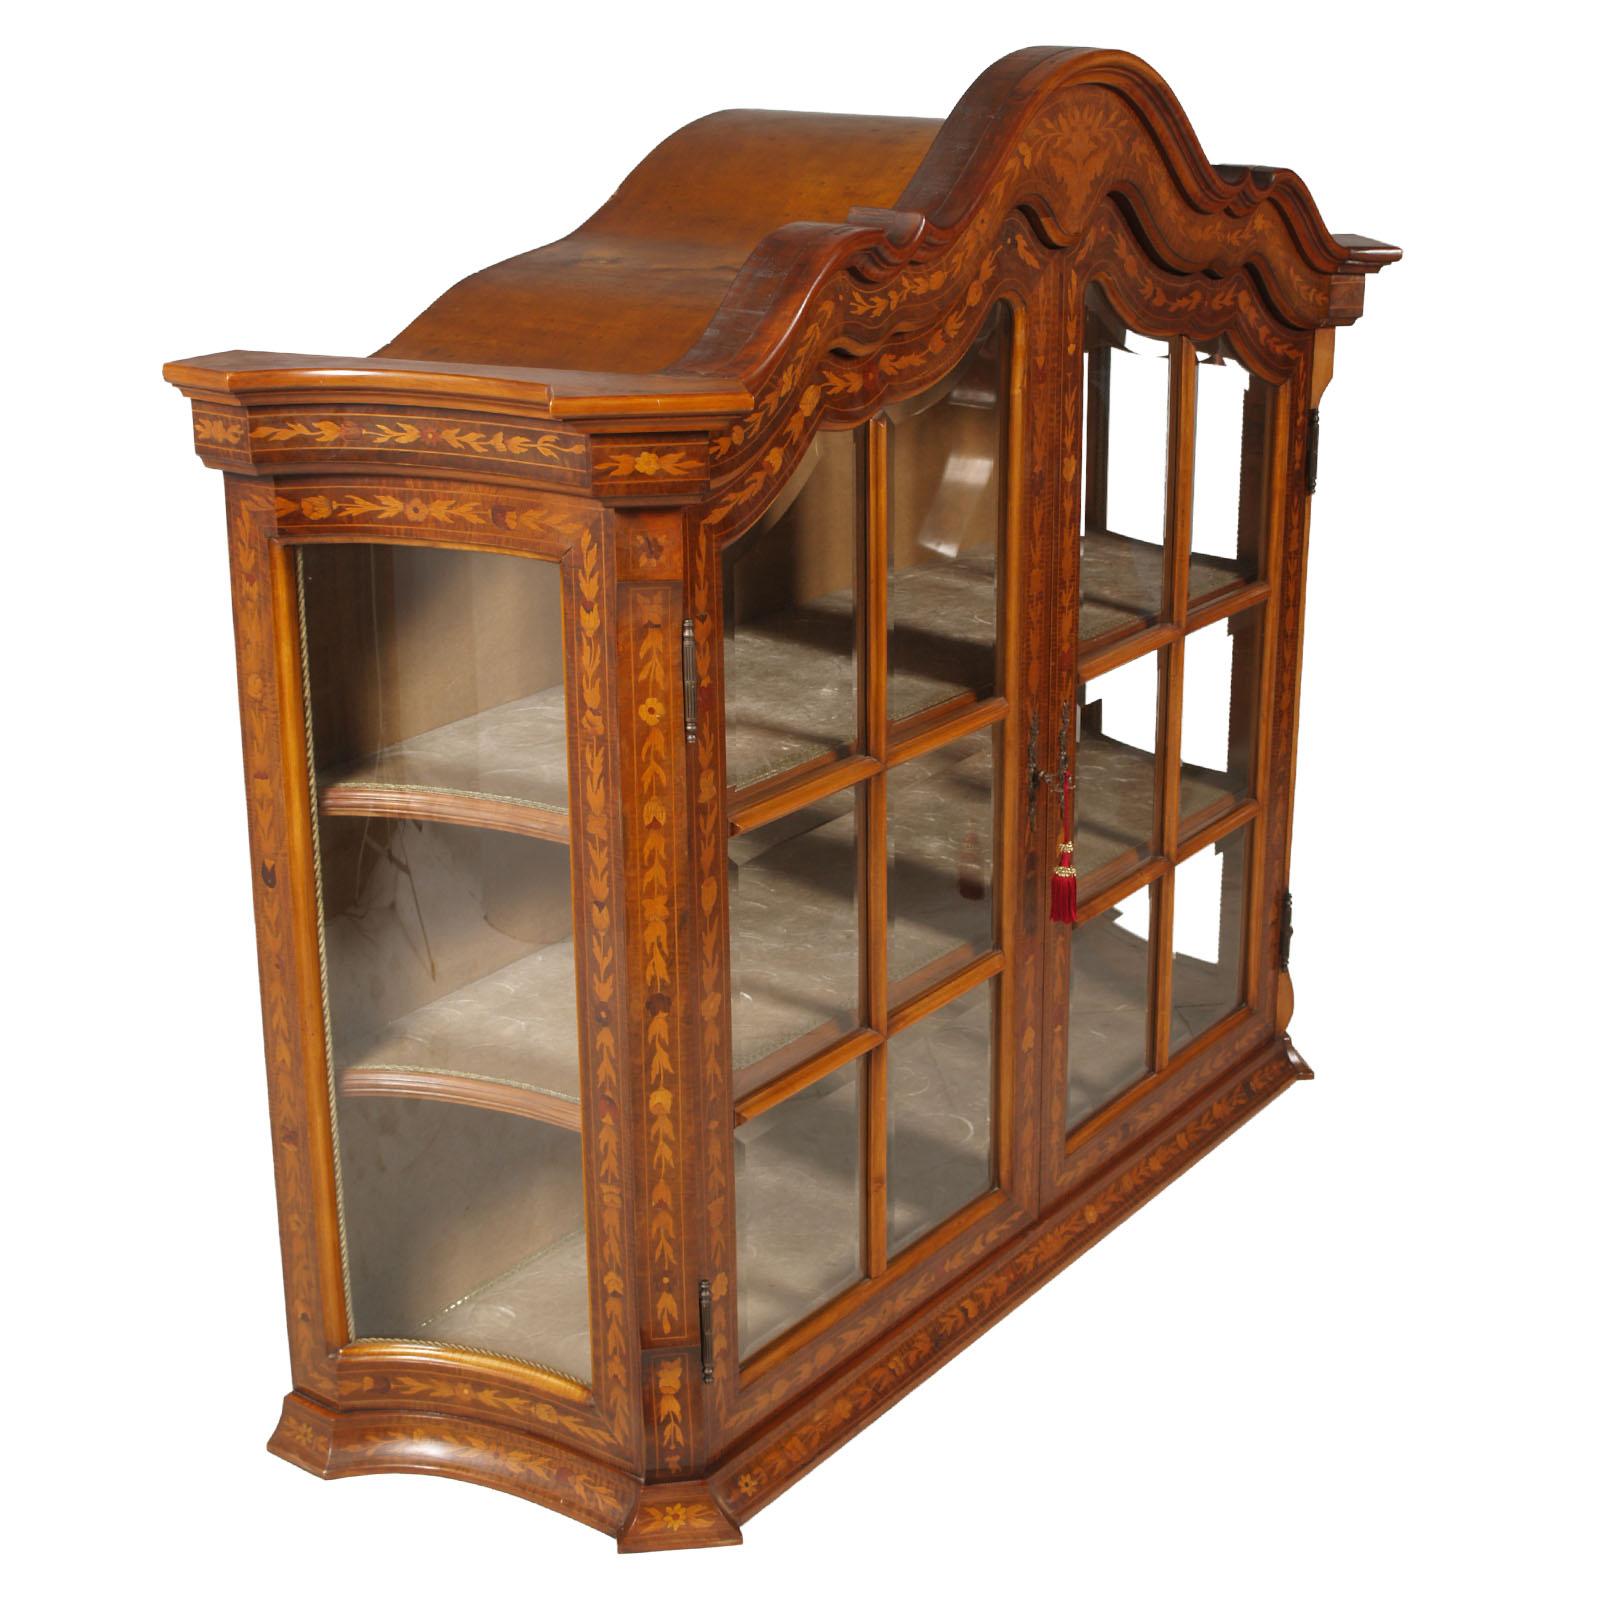 1930s Venetian Walnut Baroque Sideboard and Display Cabinet Richly Floral Inlaid For Sale 8